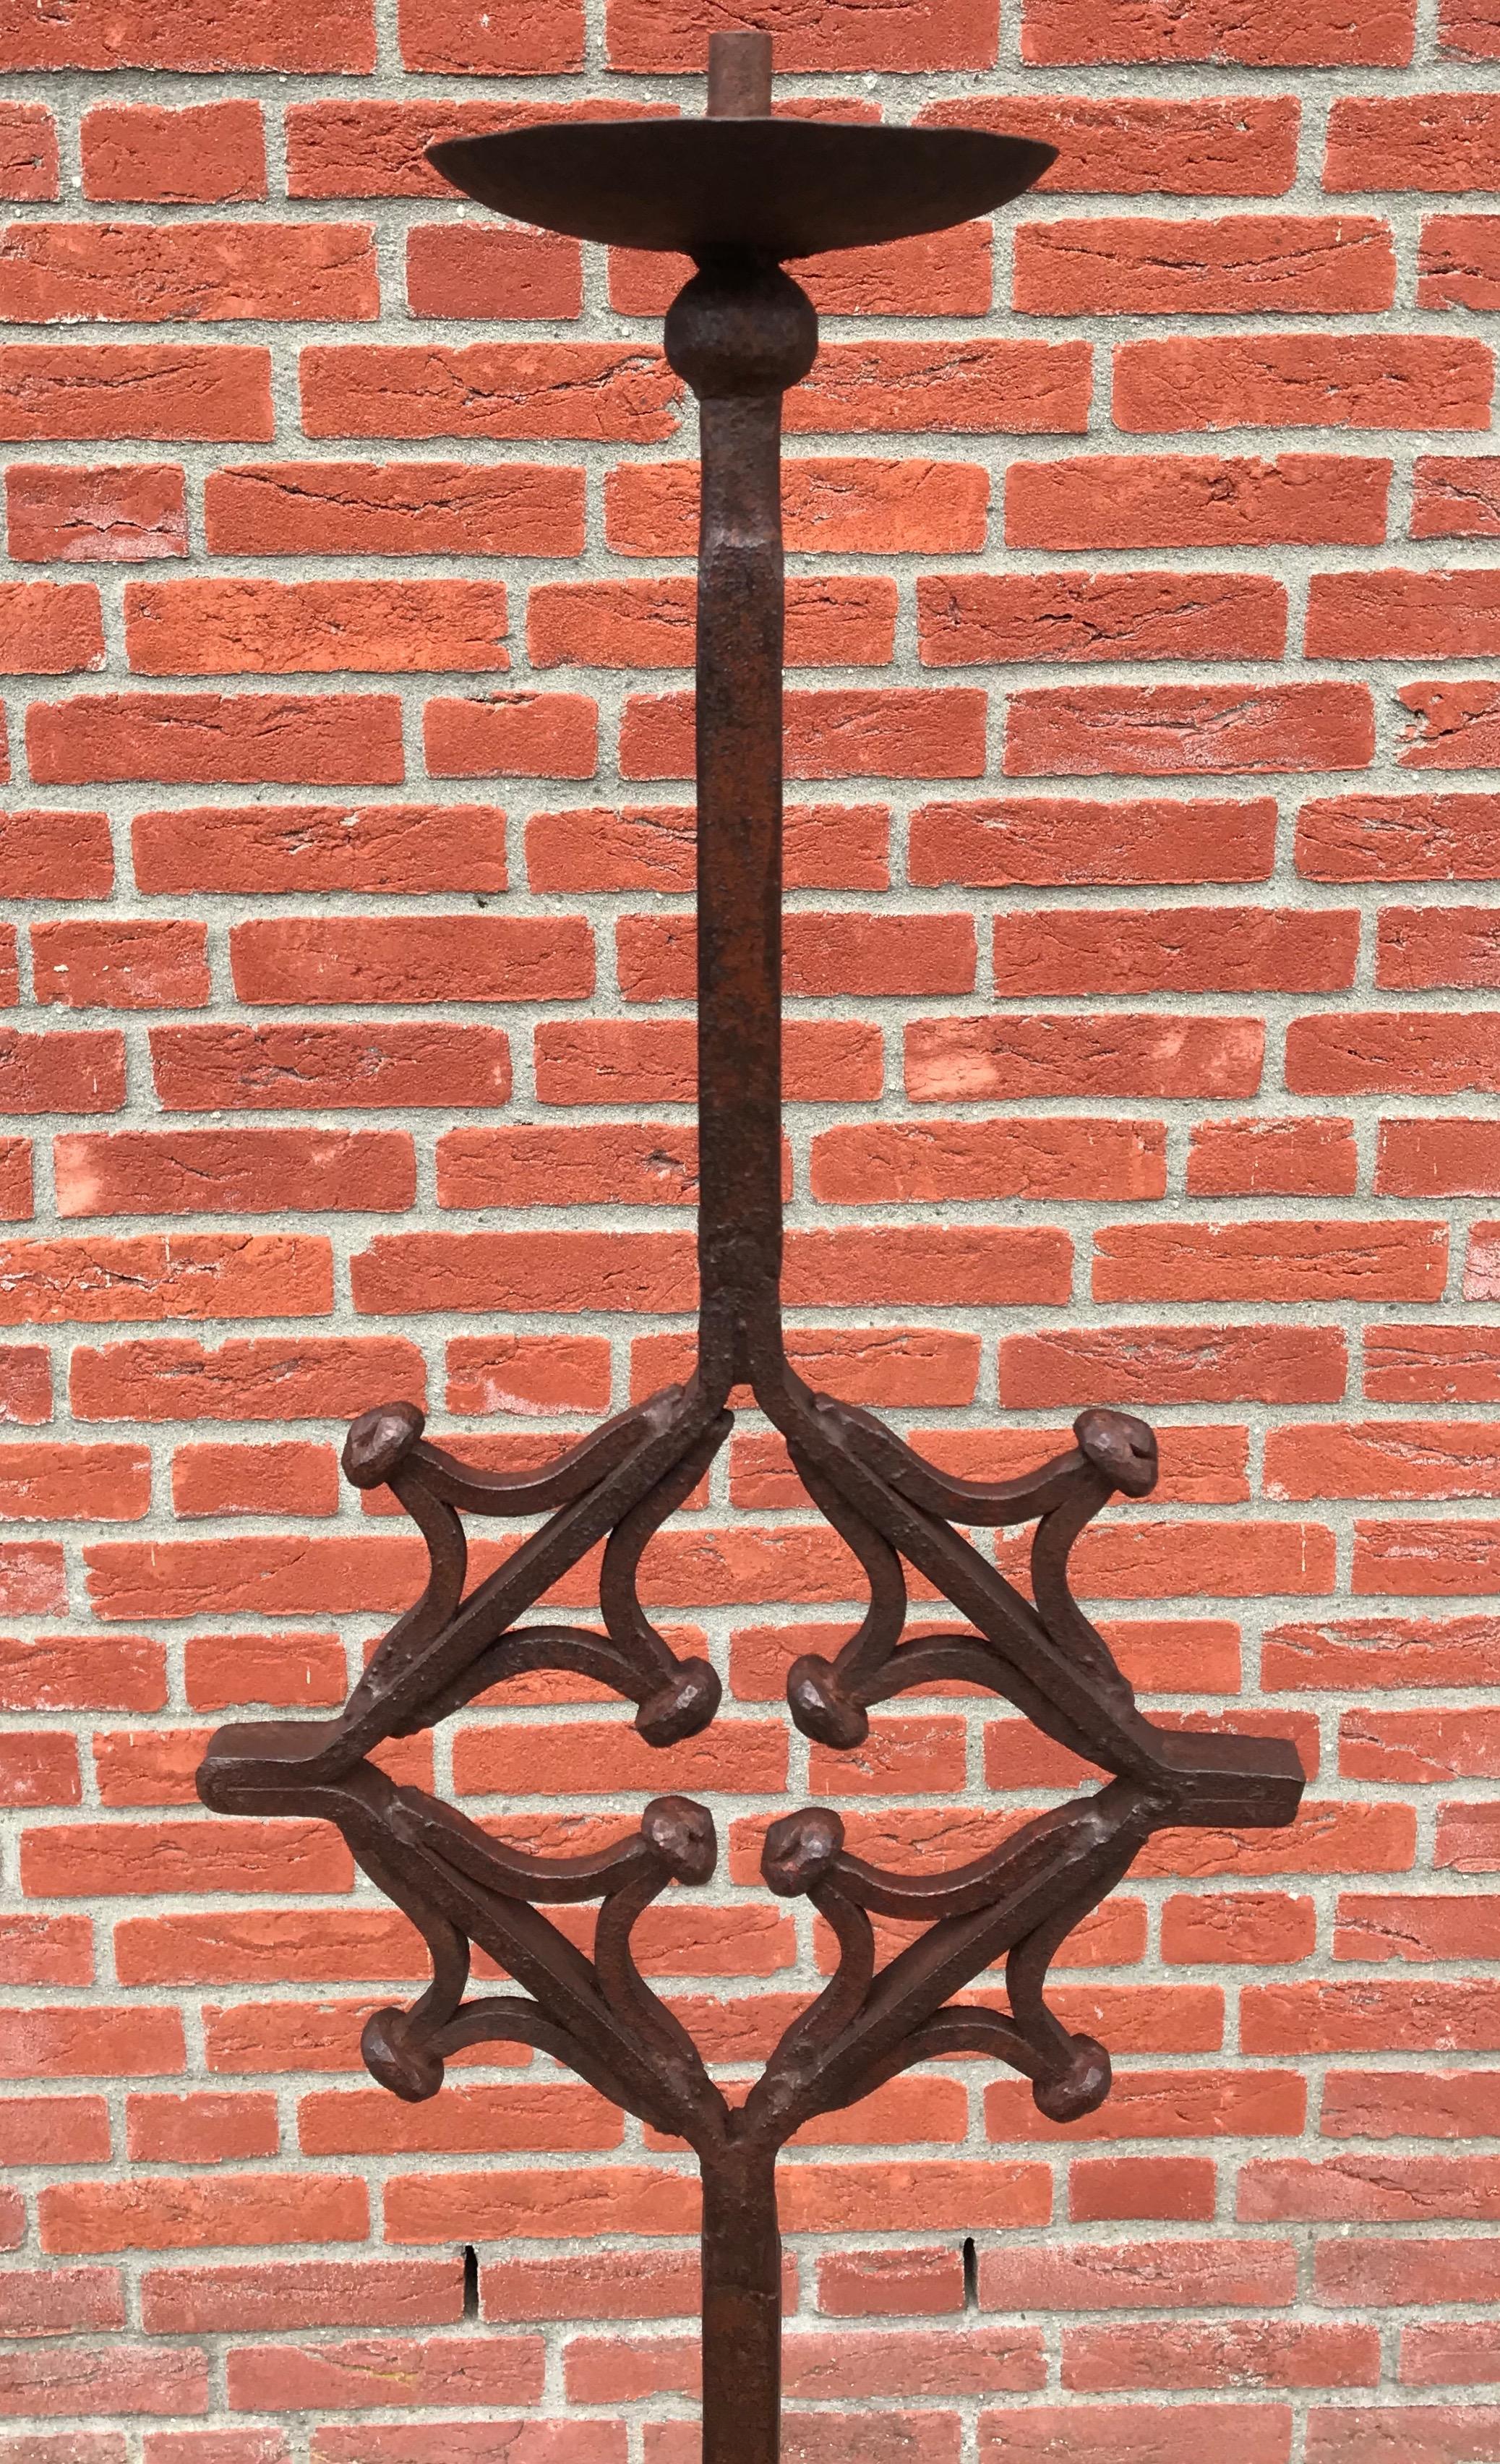 European Antique Hand Forged Wrought Iron Gothic Revival Castle Floorlamp or Candlestick For Sale